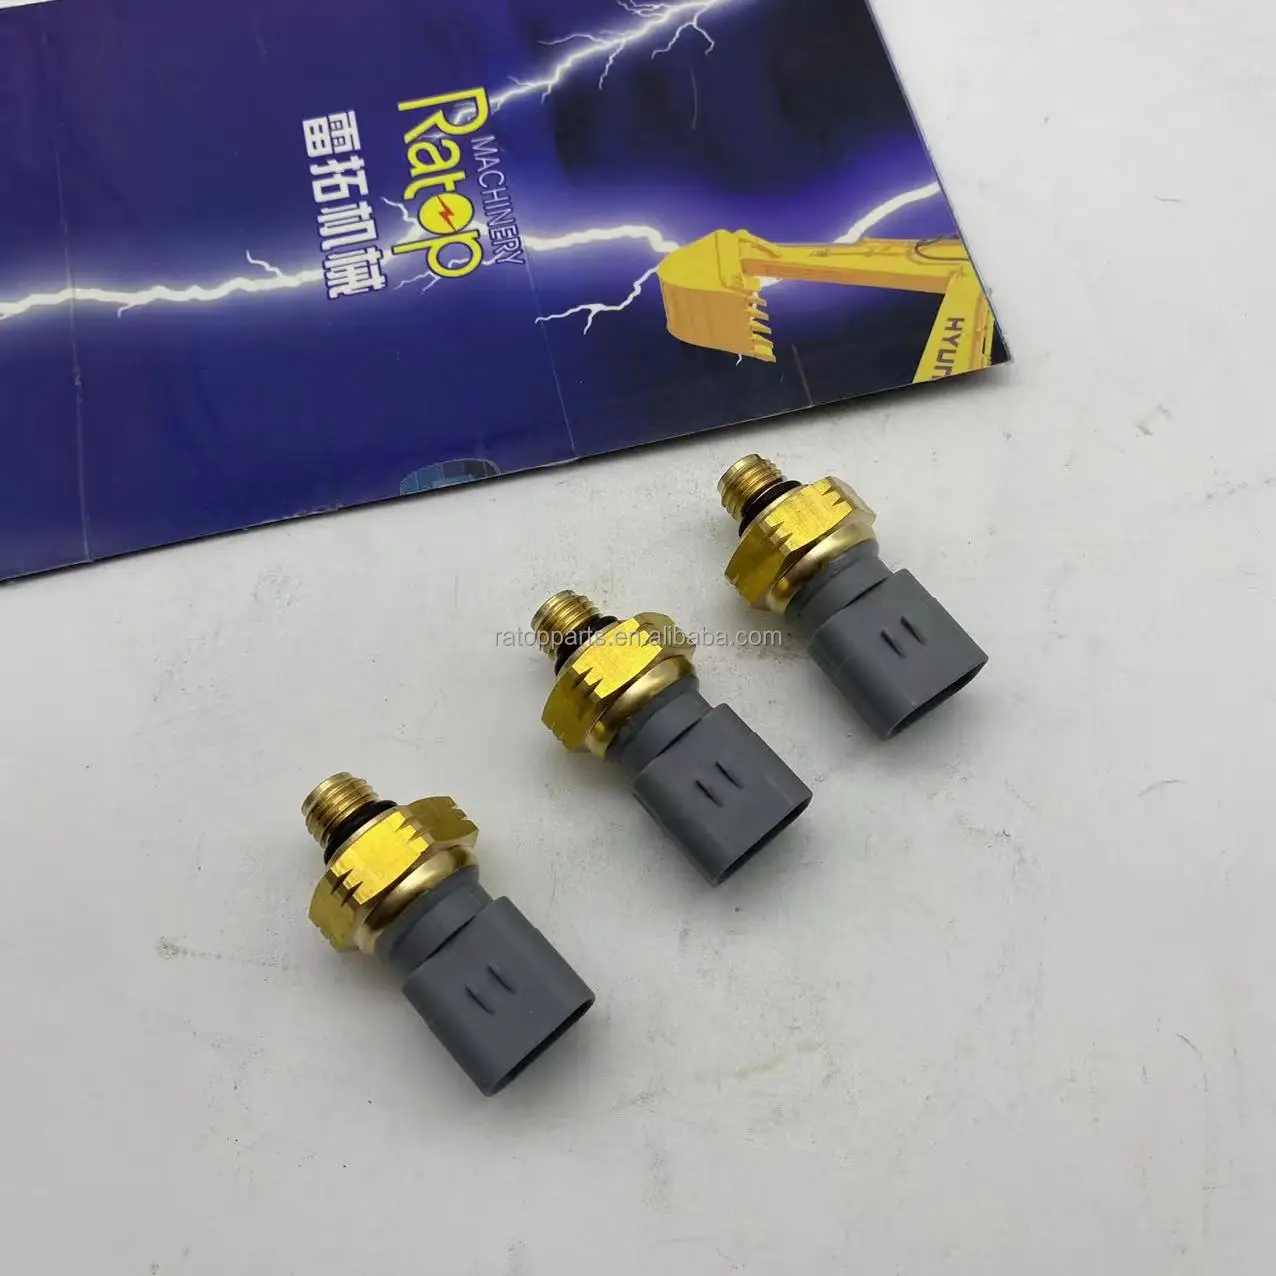 High Quality 320-3060 325-8634 Fuel Pressure Sensor 3203060 3258634 For  C7.1 - Buy 320-3060,325-8634,3203060 Product on